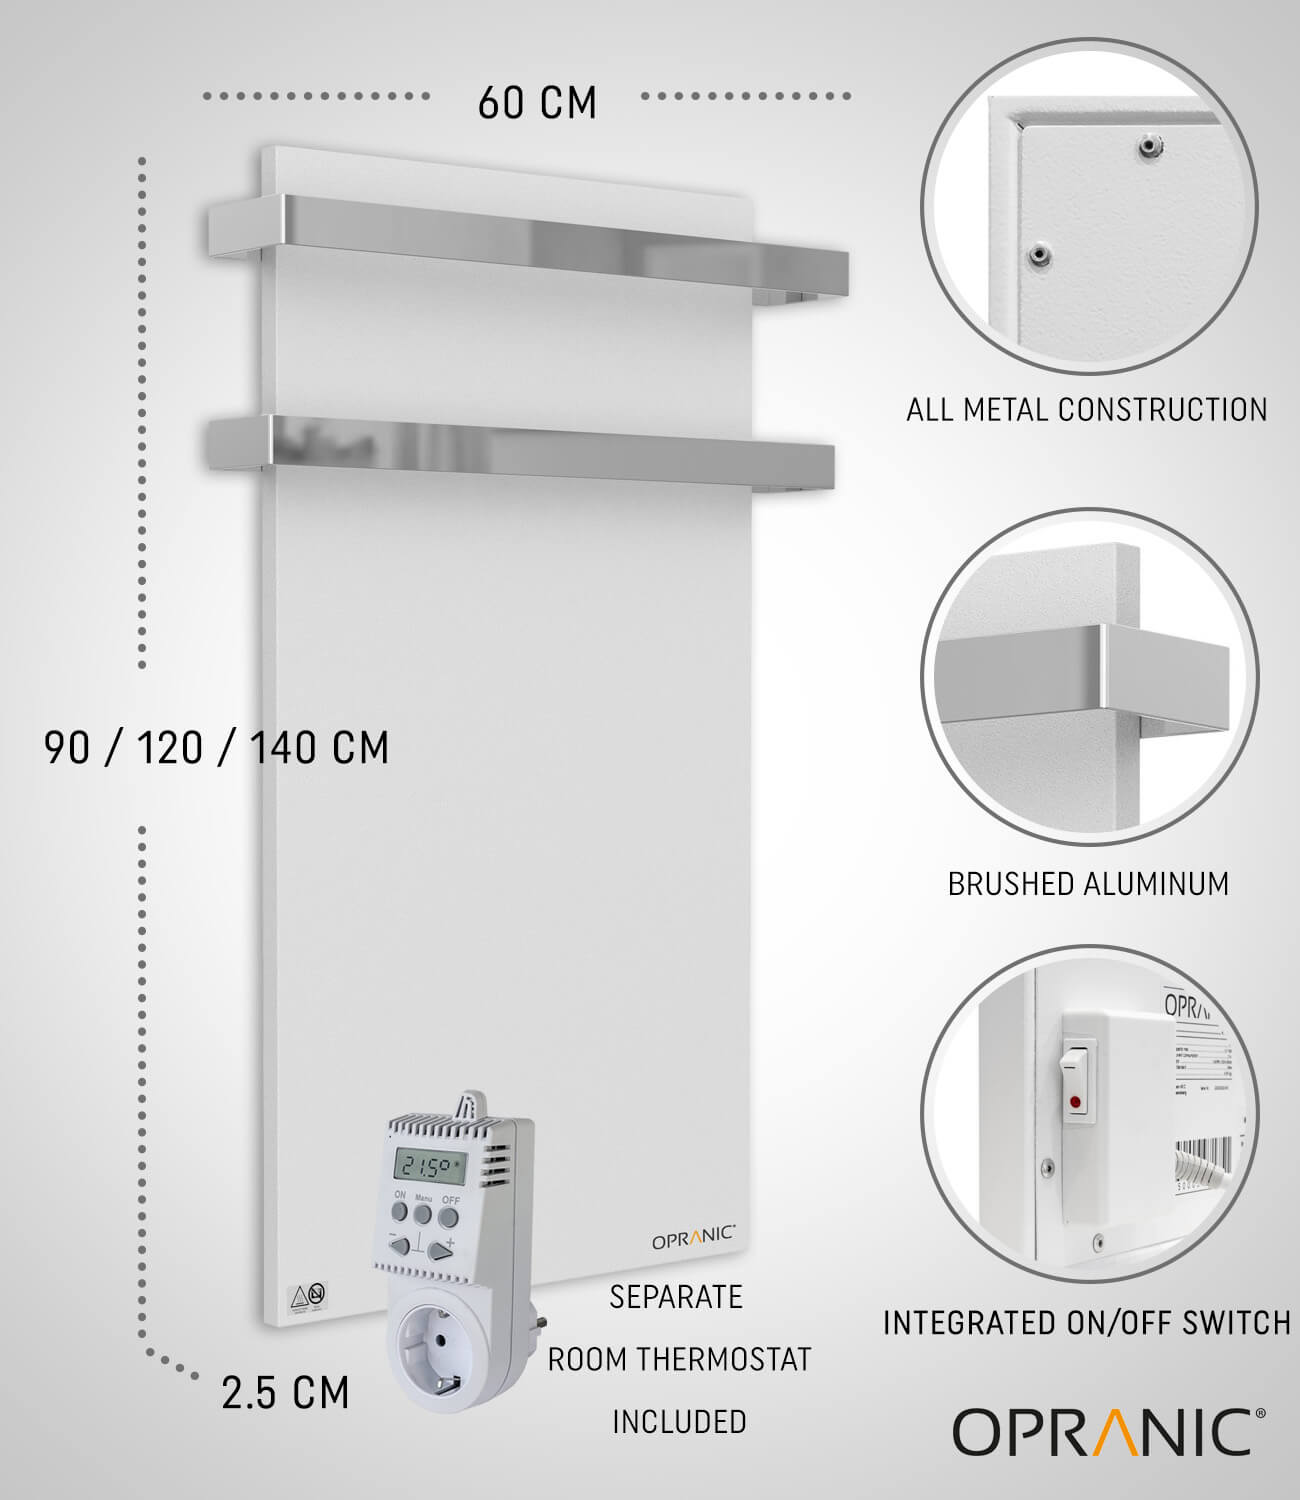 OPRANIC P5, Metal 900W, Infrared Bathroom Panel Heater with Towel Holder and OT50 Thermostat